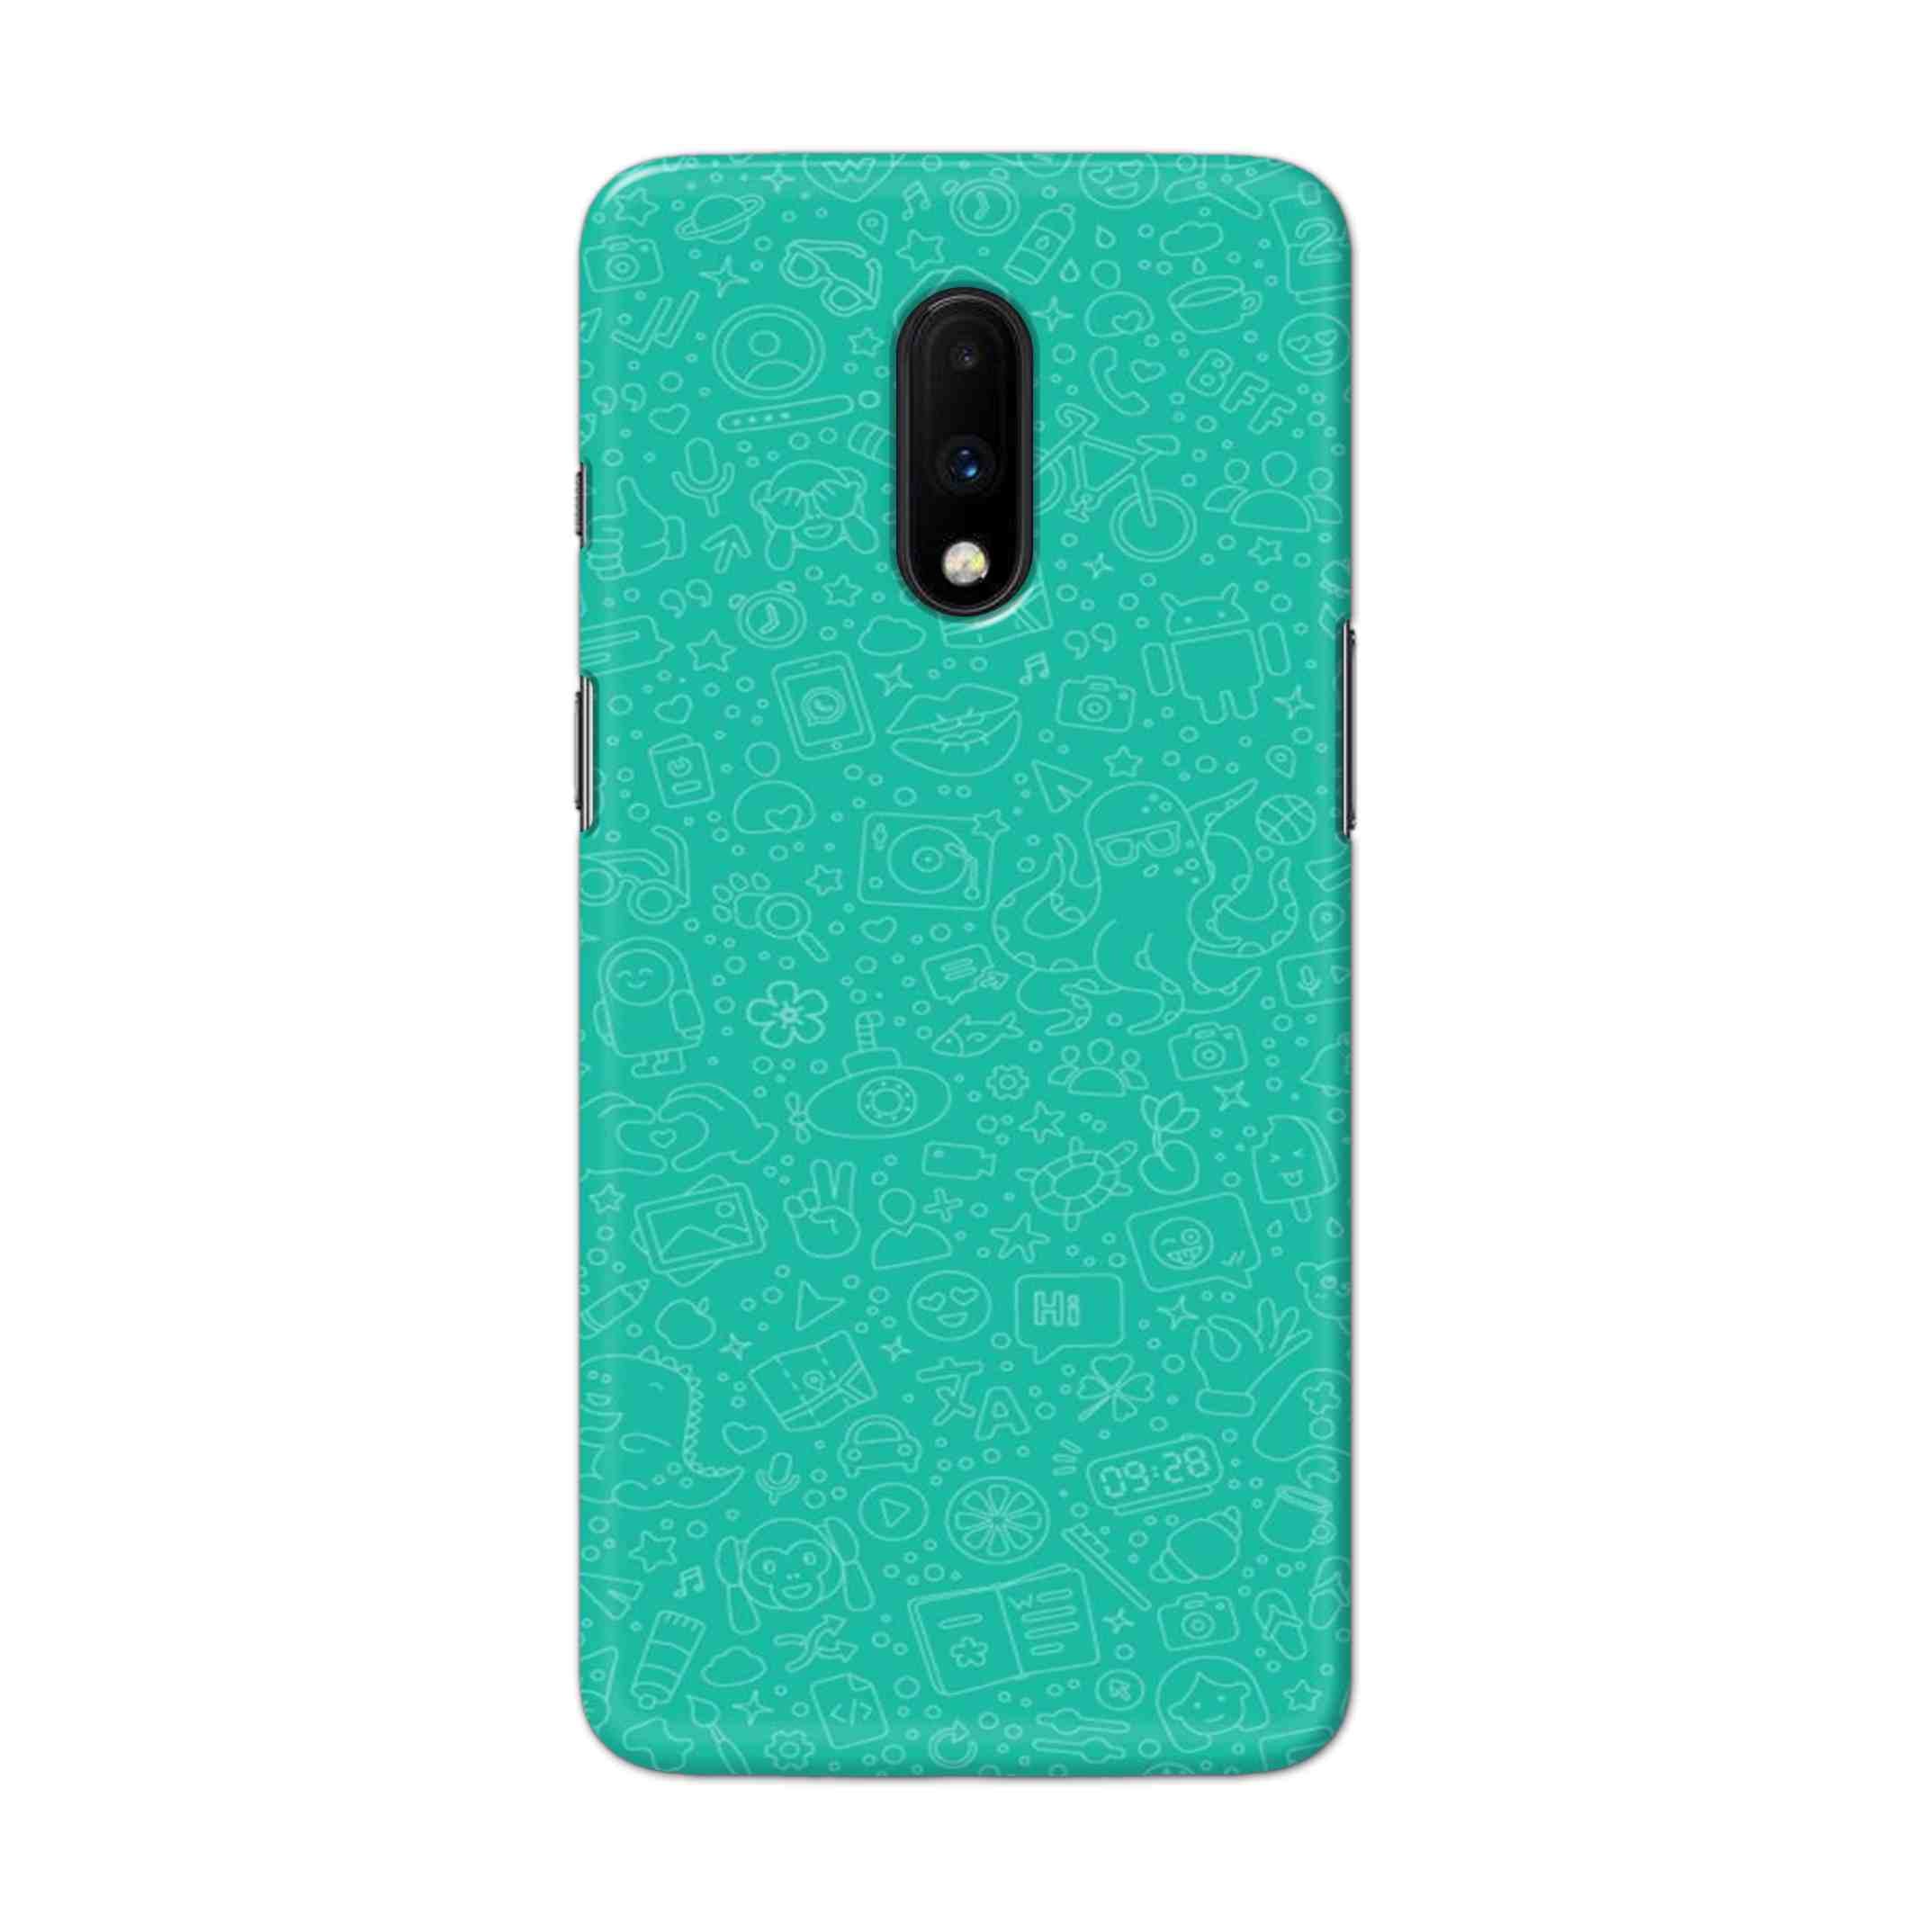 Buy Whatsapp Hard Back Mobile Phone Case Cover For OnePlus 7 Online